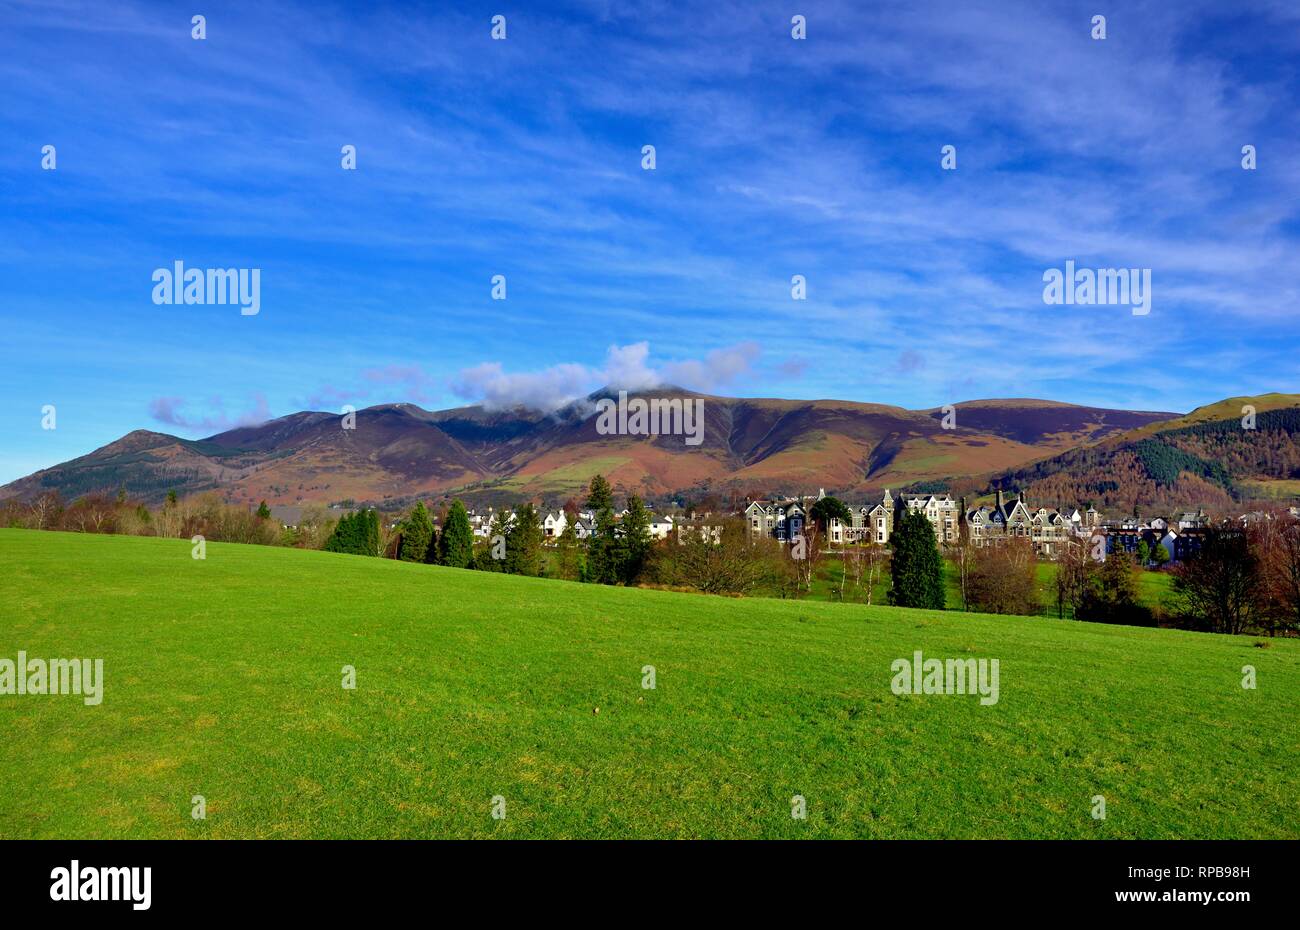 Keswick,view of Skiddaw covered in low cloud,Cumbria,England,UK Stock Photo